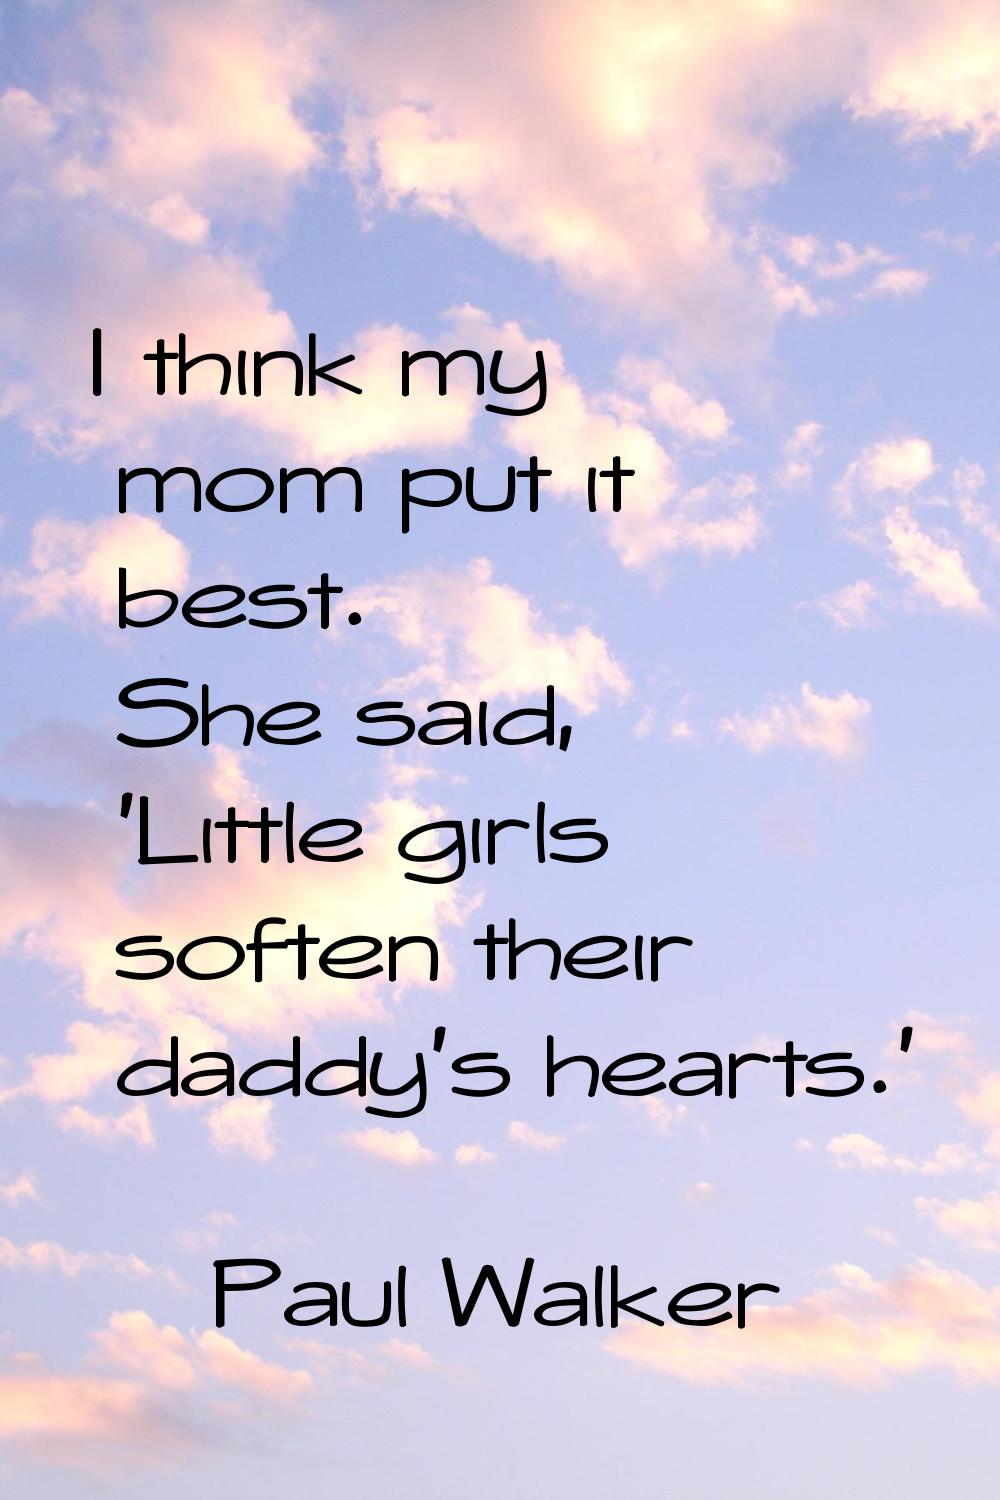 I think my mom put it best. She said, 'Little girls soften their daddy's hearts.'